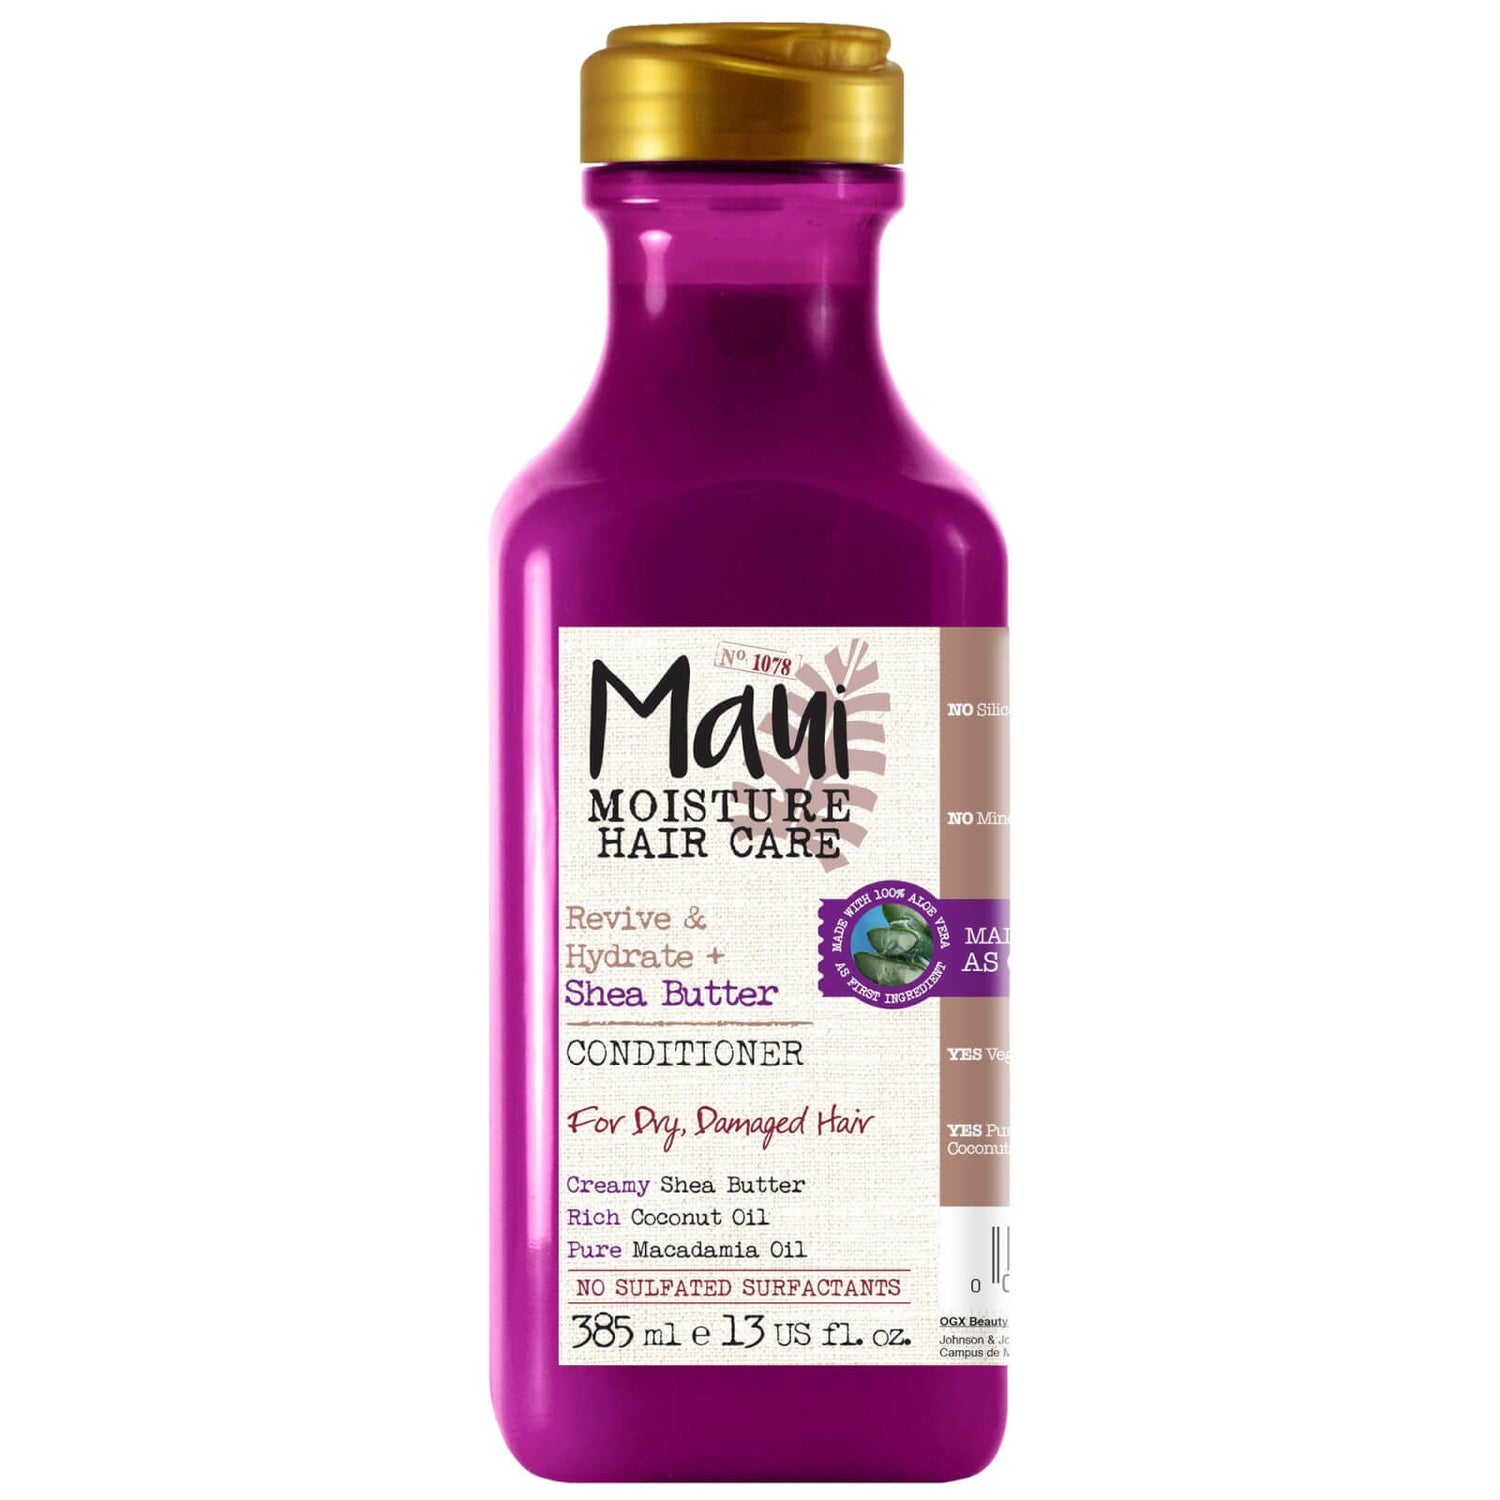 Maui Moisture Revive and Hydrate+ Shea Butter Conditioner 385ml